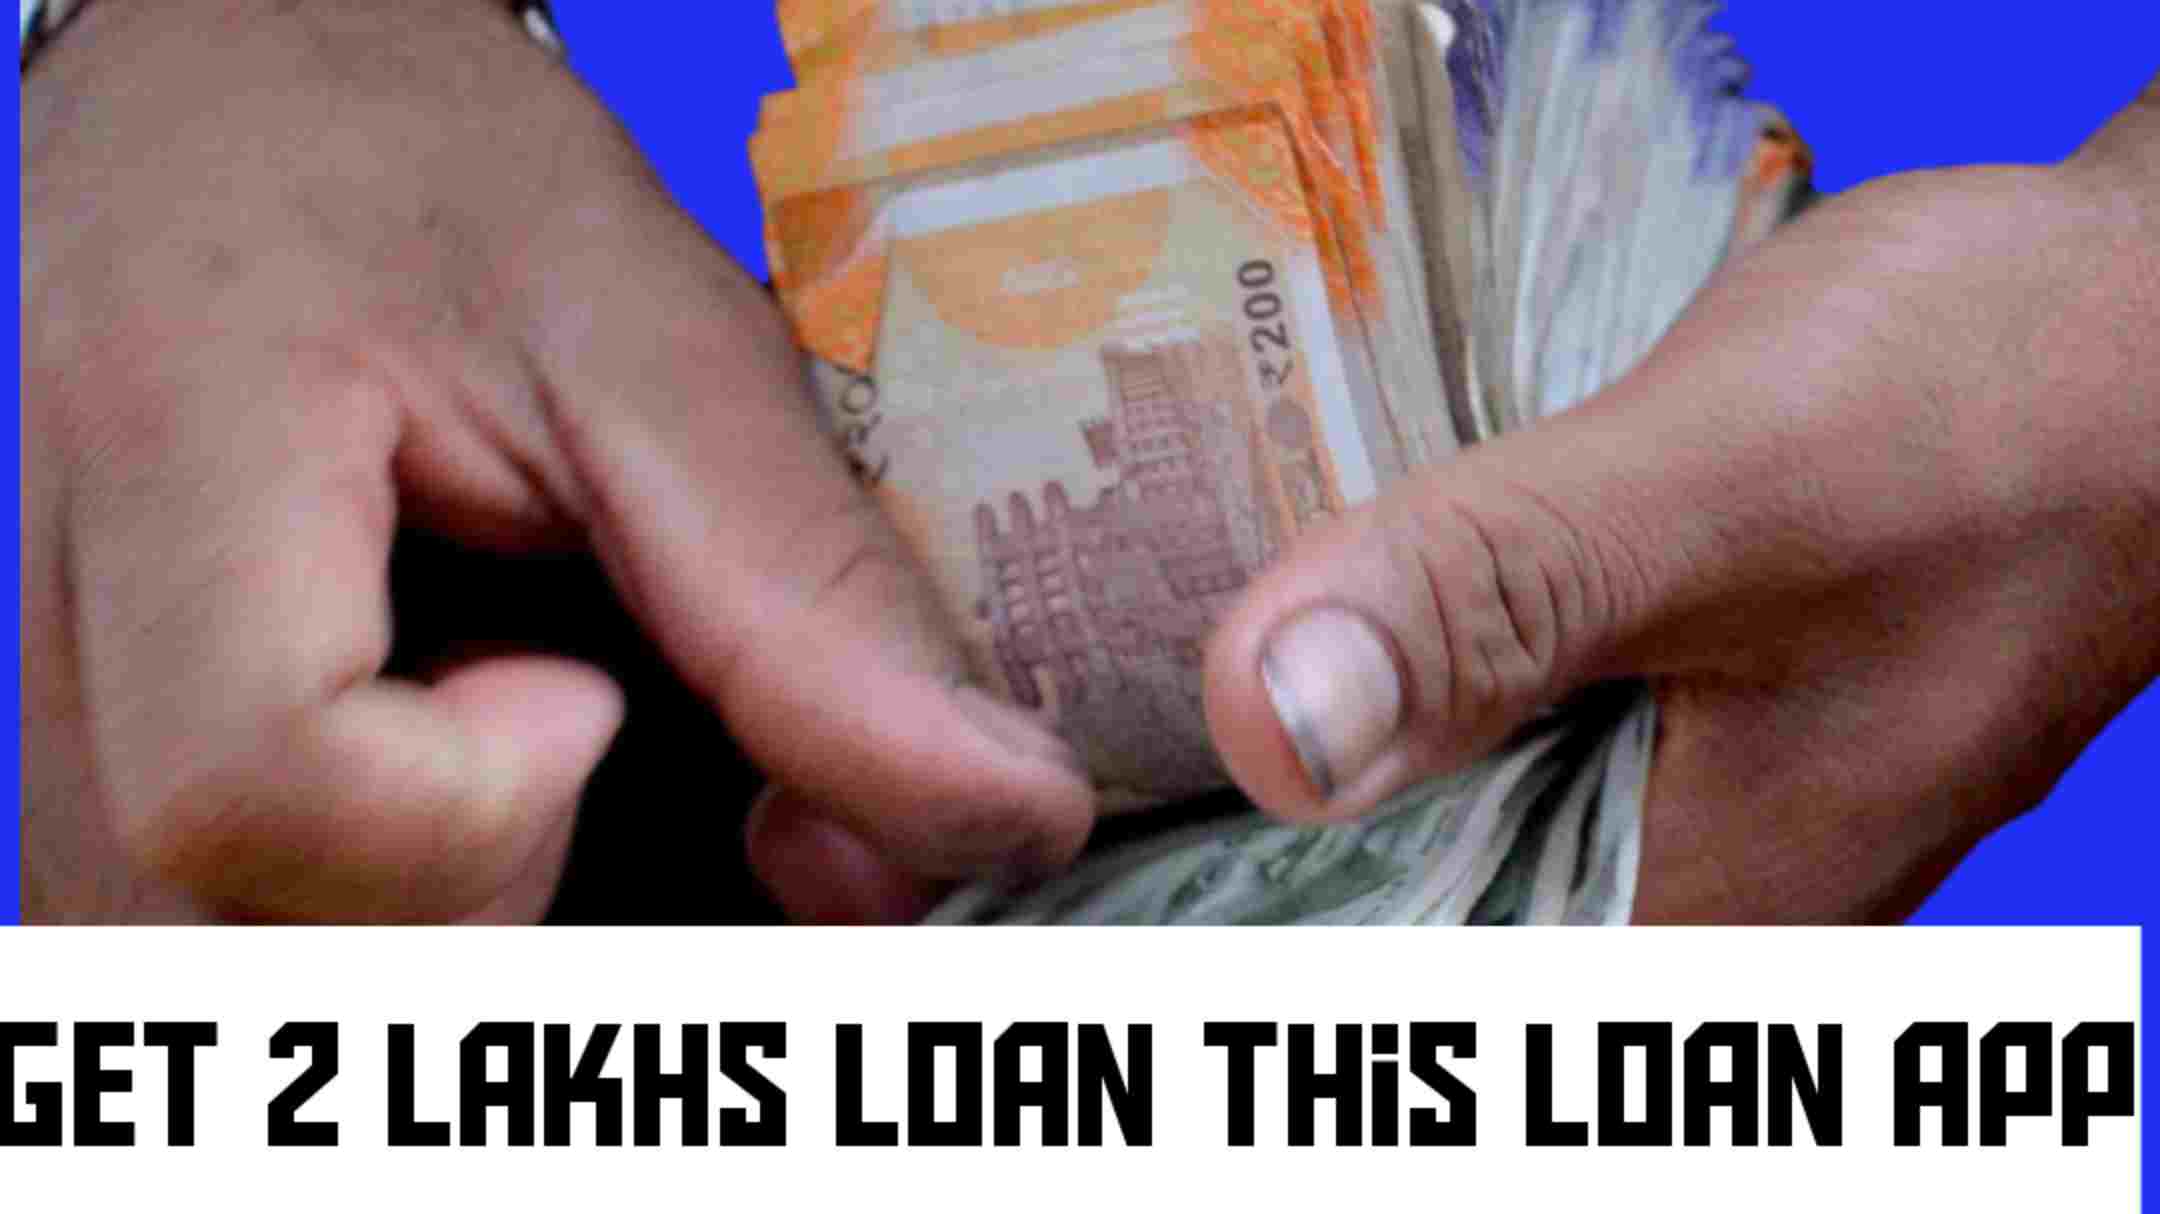 Get a loan of Rs 2 lakh immediately from the loan app, its advantages and disadvantages/